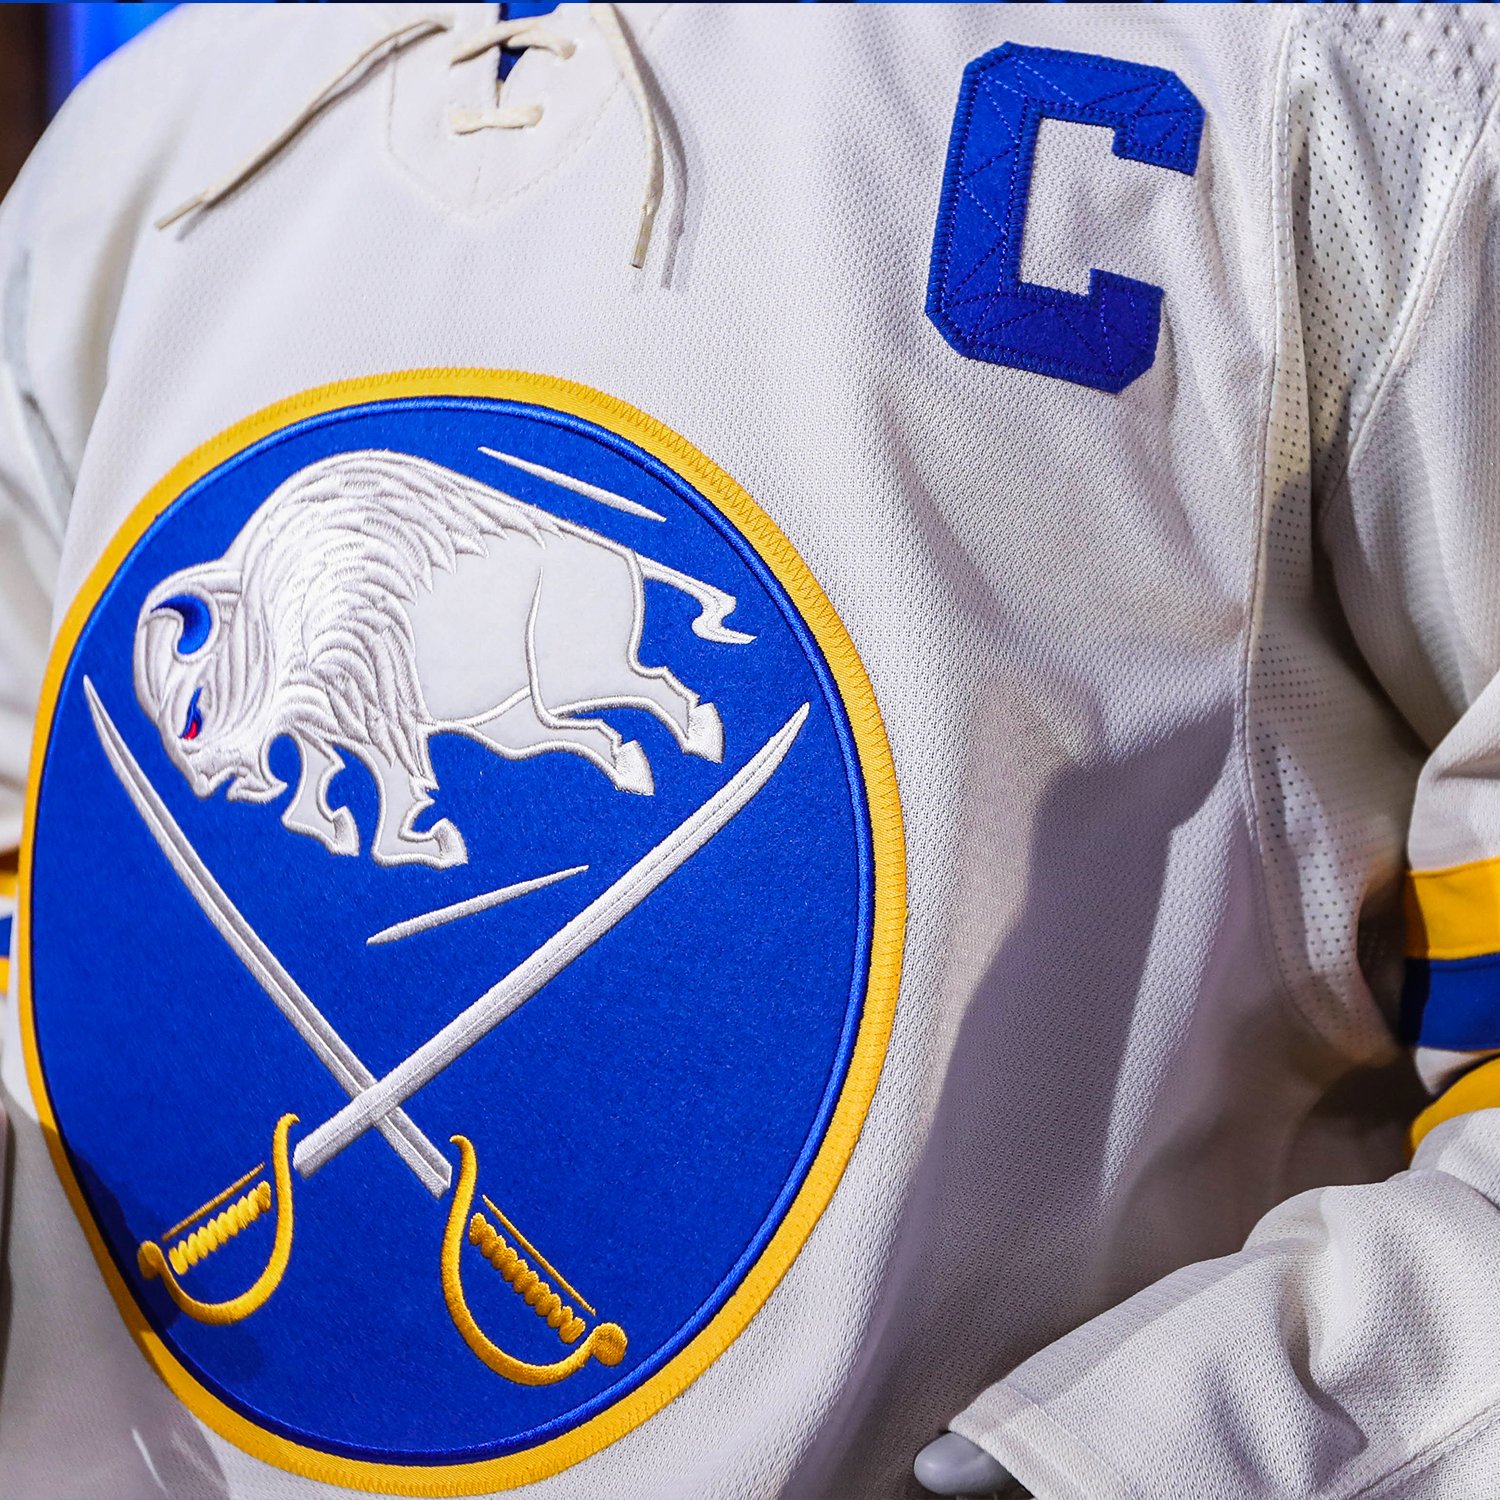 Sabres to feature 'butterknives' alternate jersey next year?